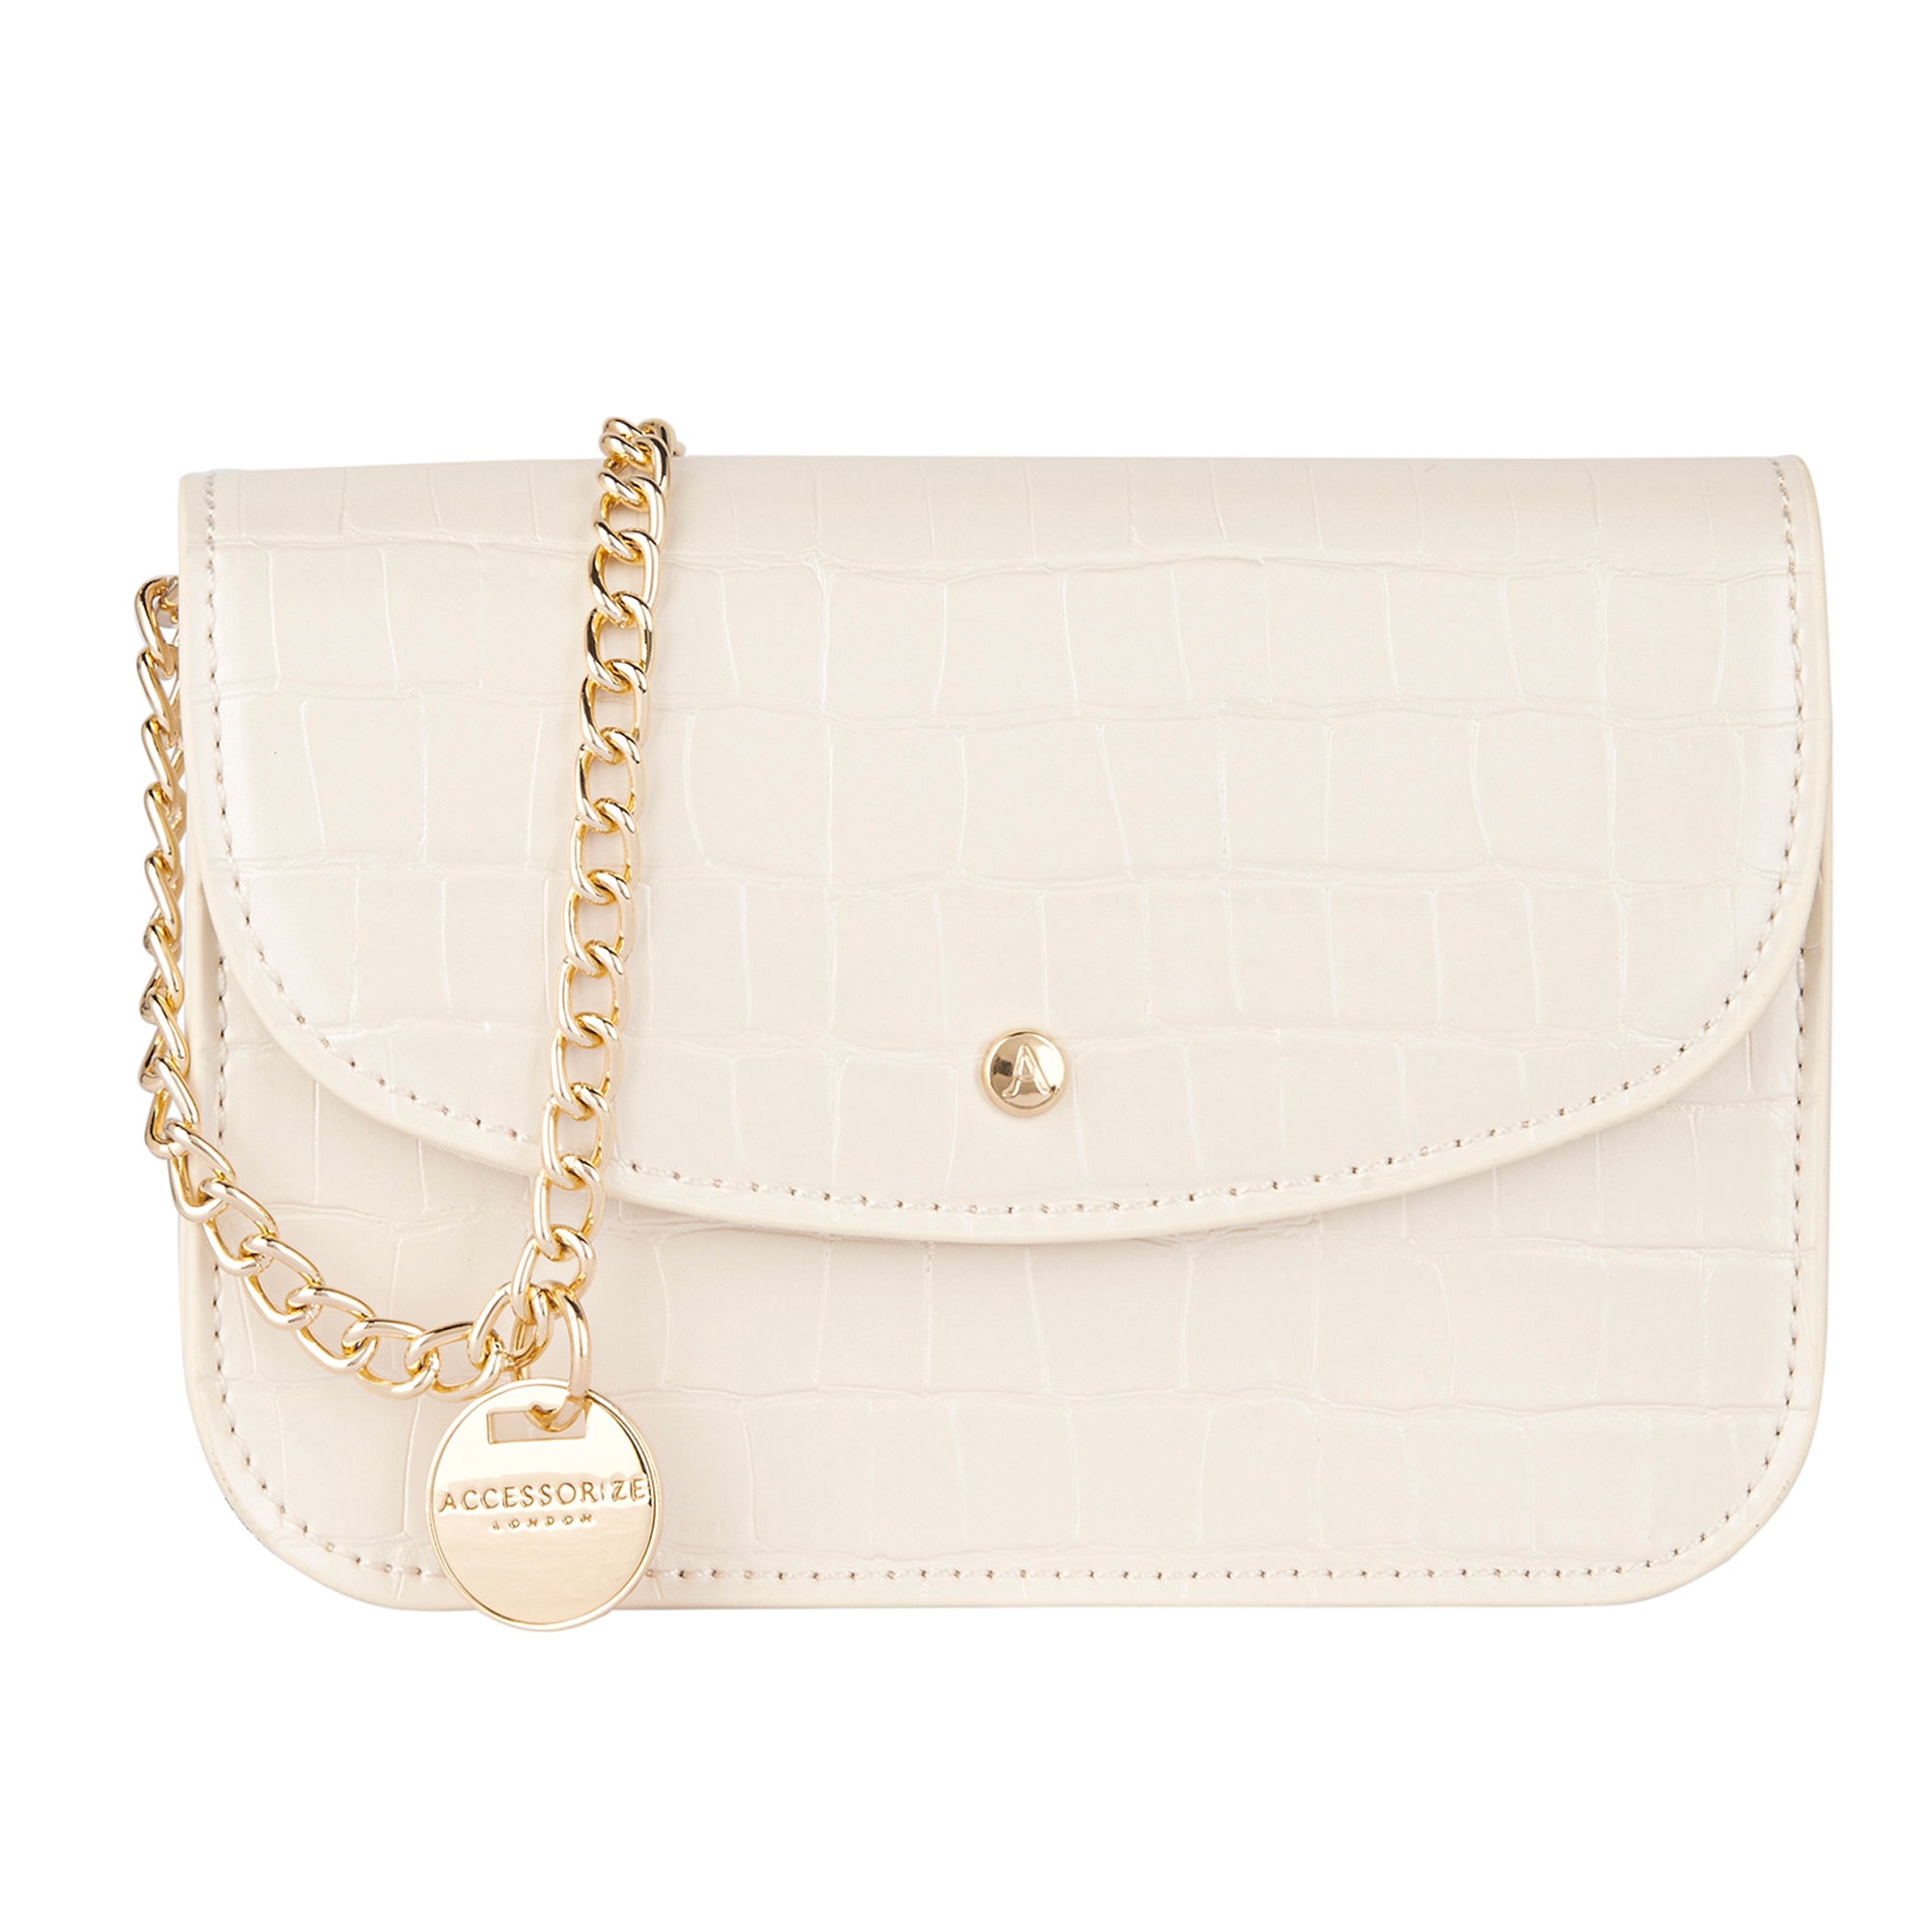 White/Gold Chanel Purse - clothing & accessories - by owner - apparel sale  - craigslist